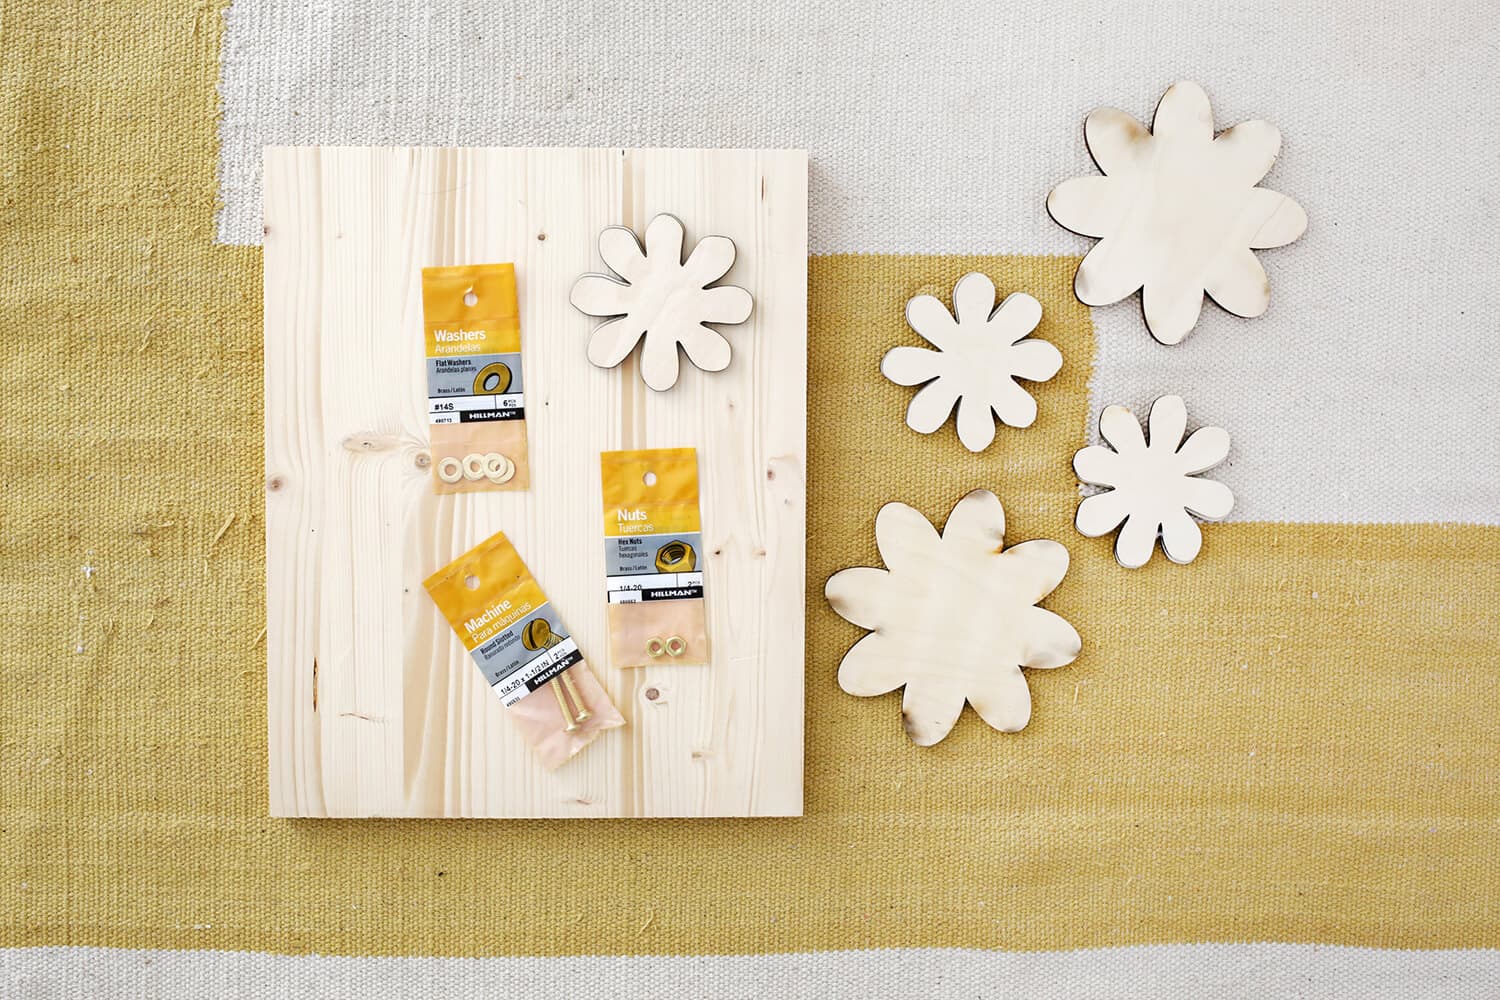 wooden board with wooden cut out flowers next to it